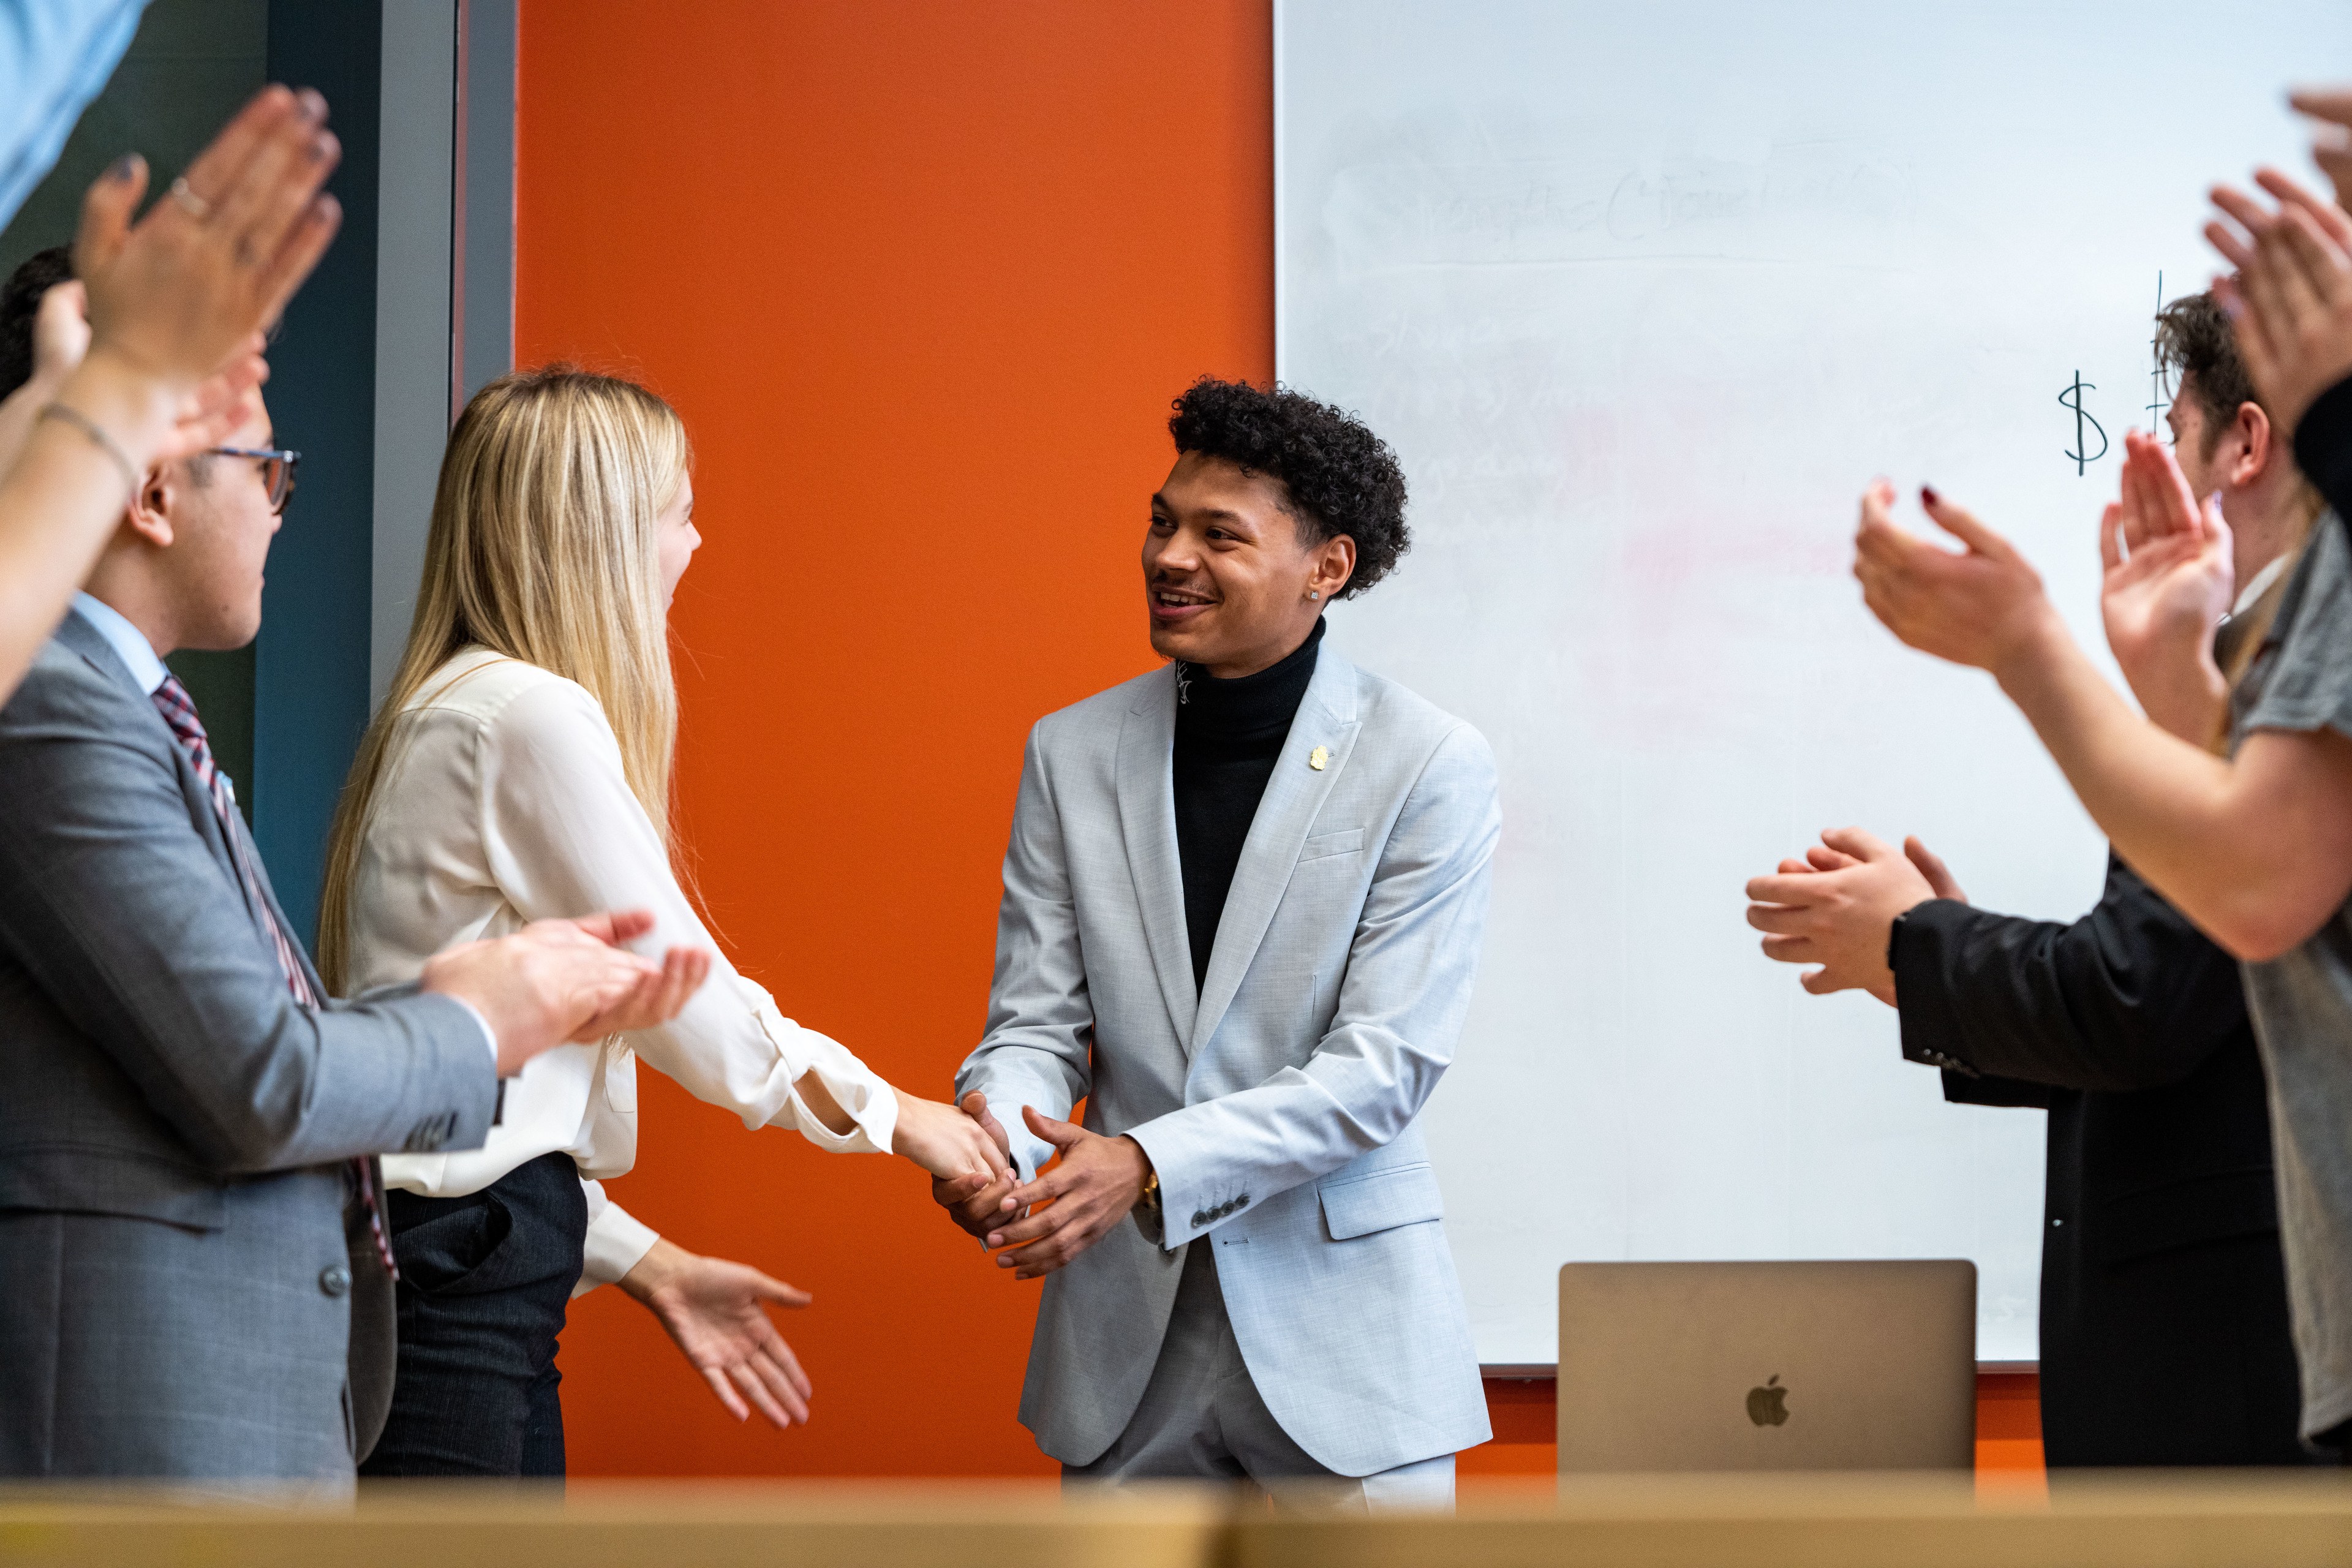 A business management student shakes hands with a classmate after a presentation while other students applaud.